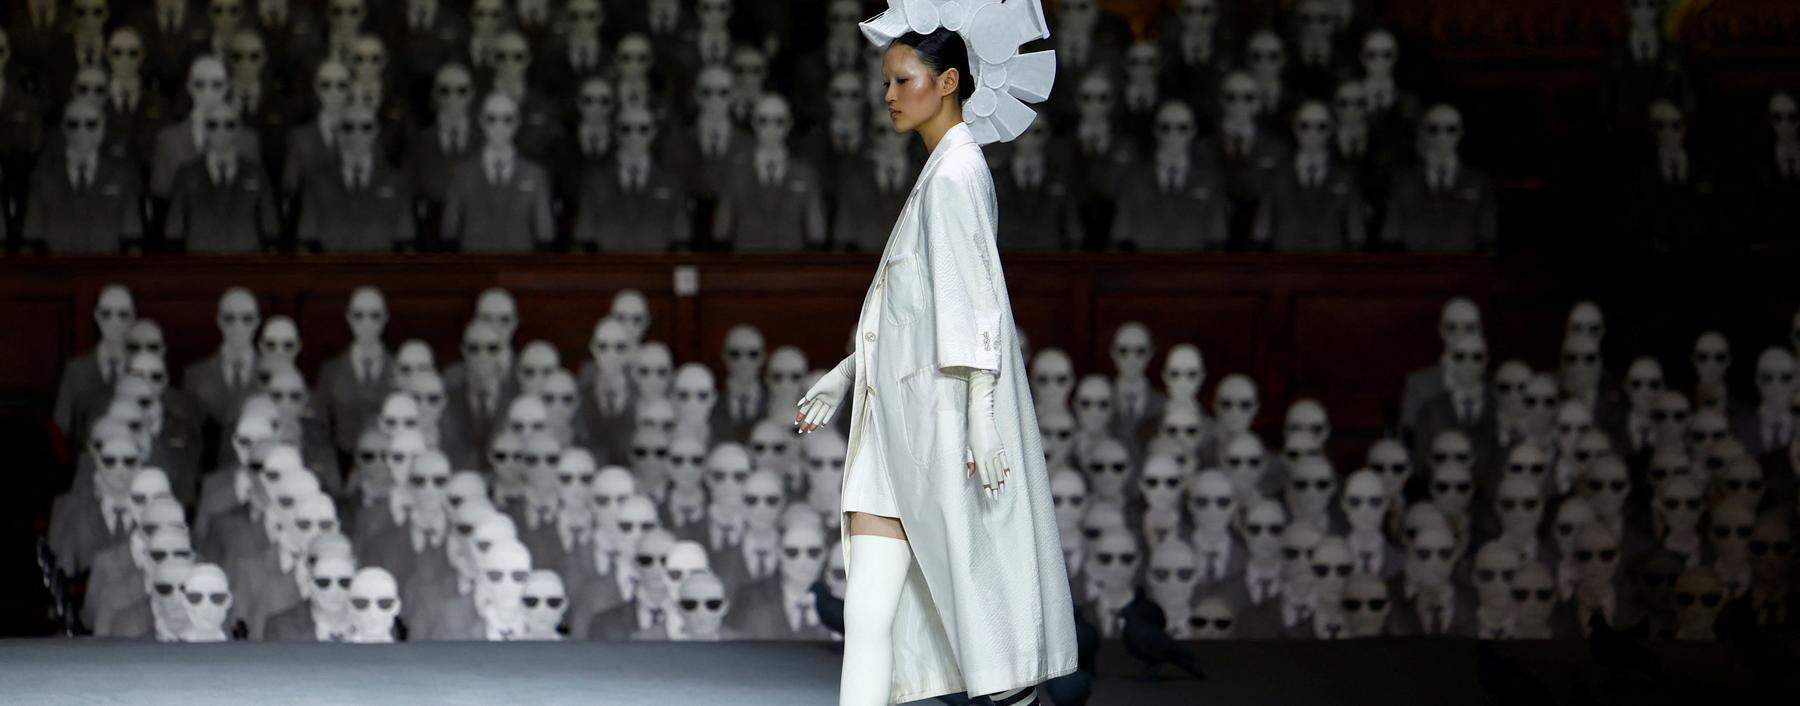 A model presents a creation by designer Thom Browne as part of his Haute Couture Fall/Winter 2023-2024 collection show at the Opera Garnier in Paris, France, July 3, 2023. REUTERS/Sarah Meyssonnier